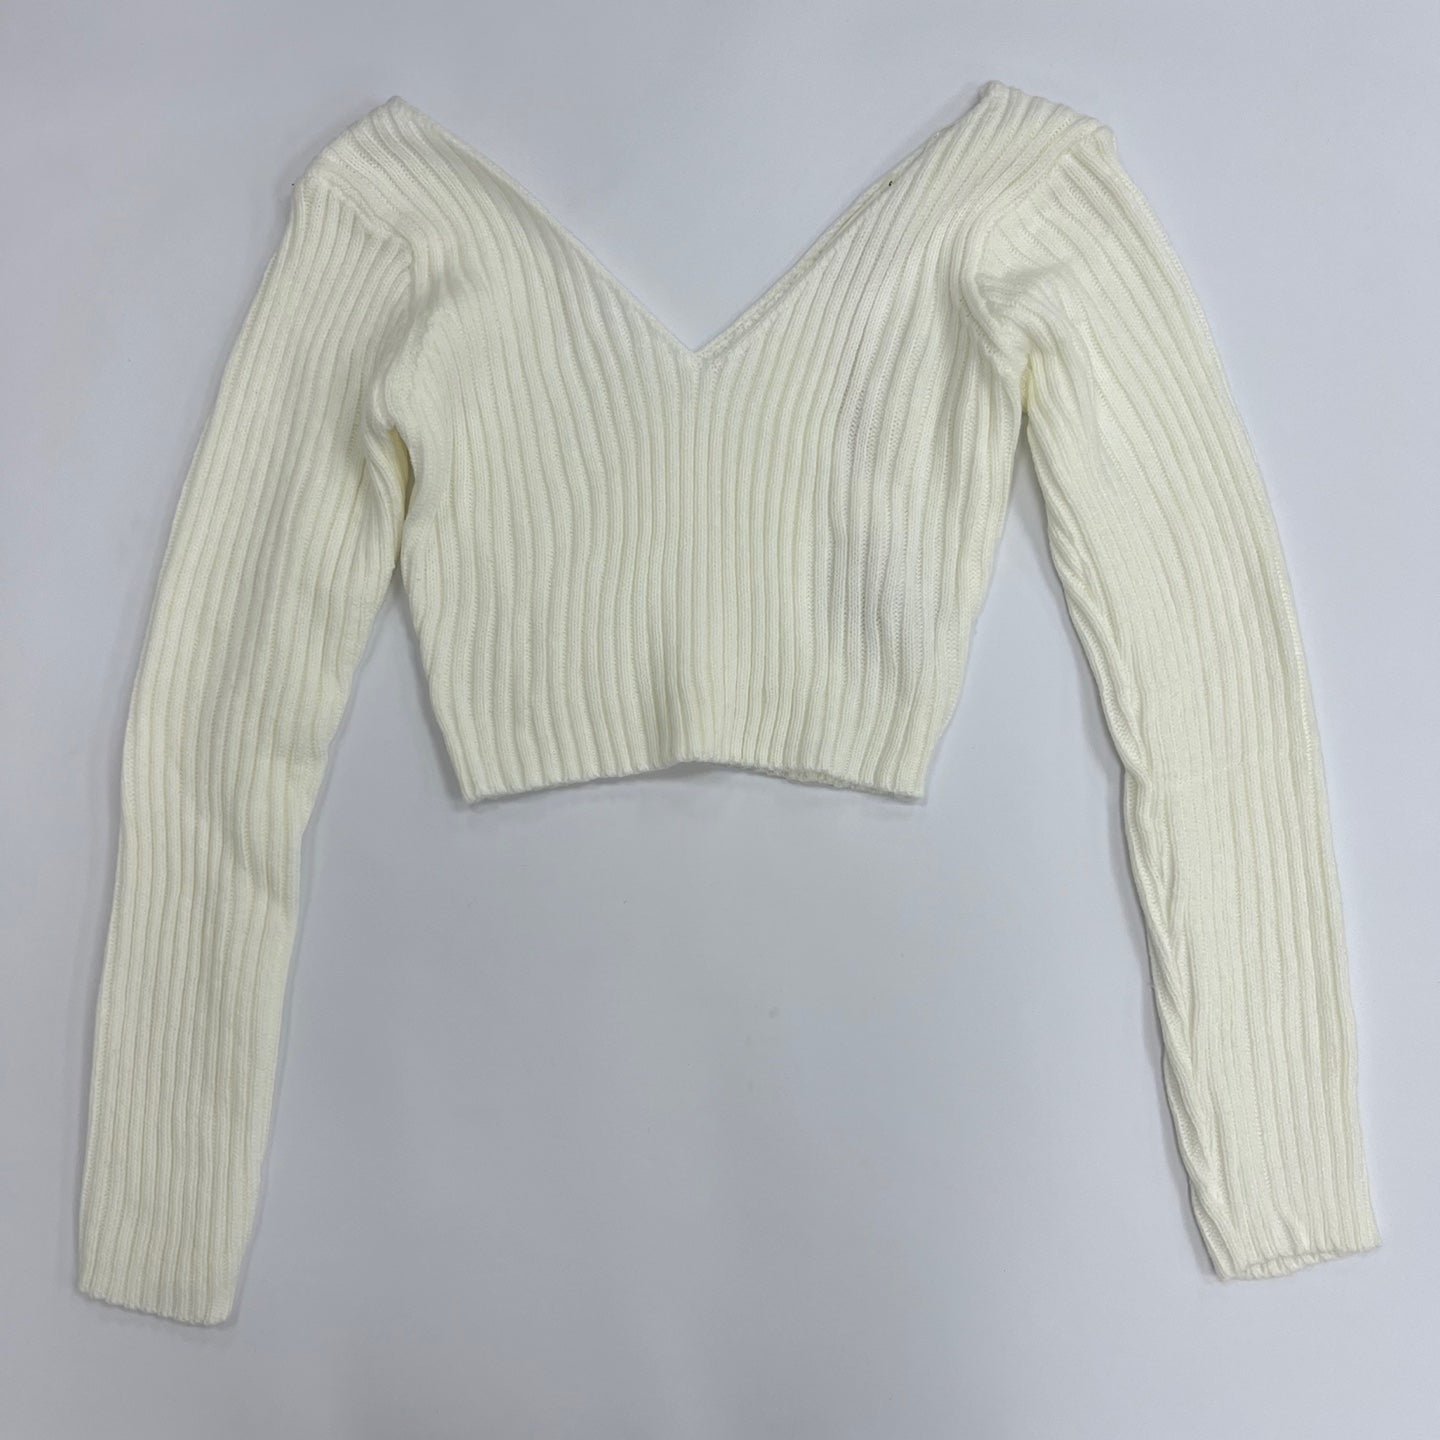 Women's Wide V-Neck Sweater Top